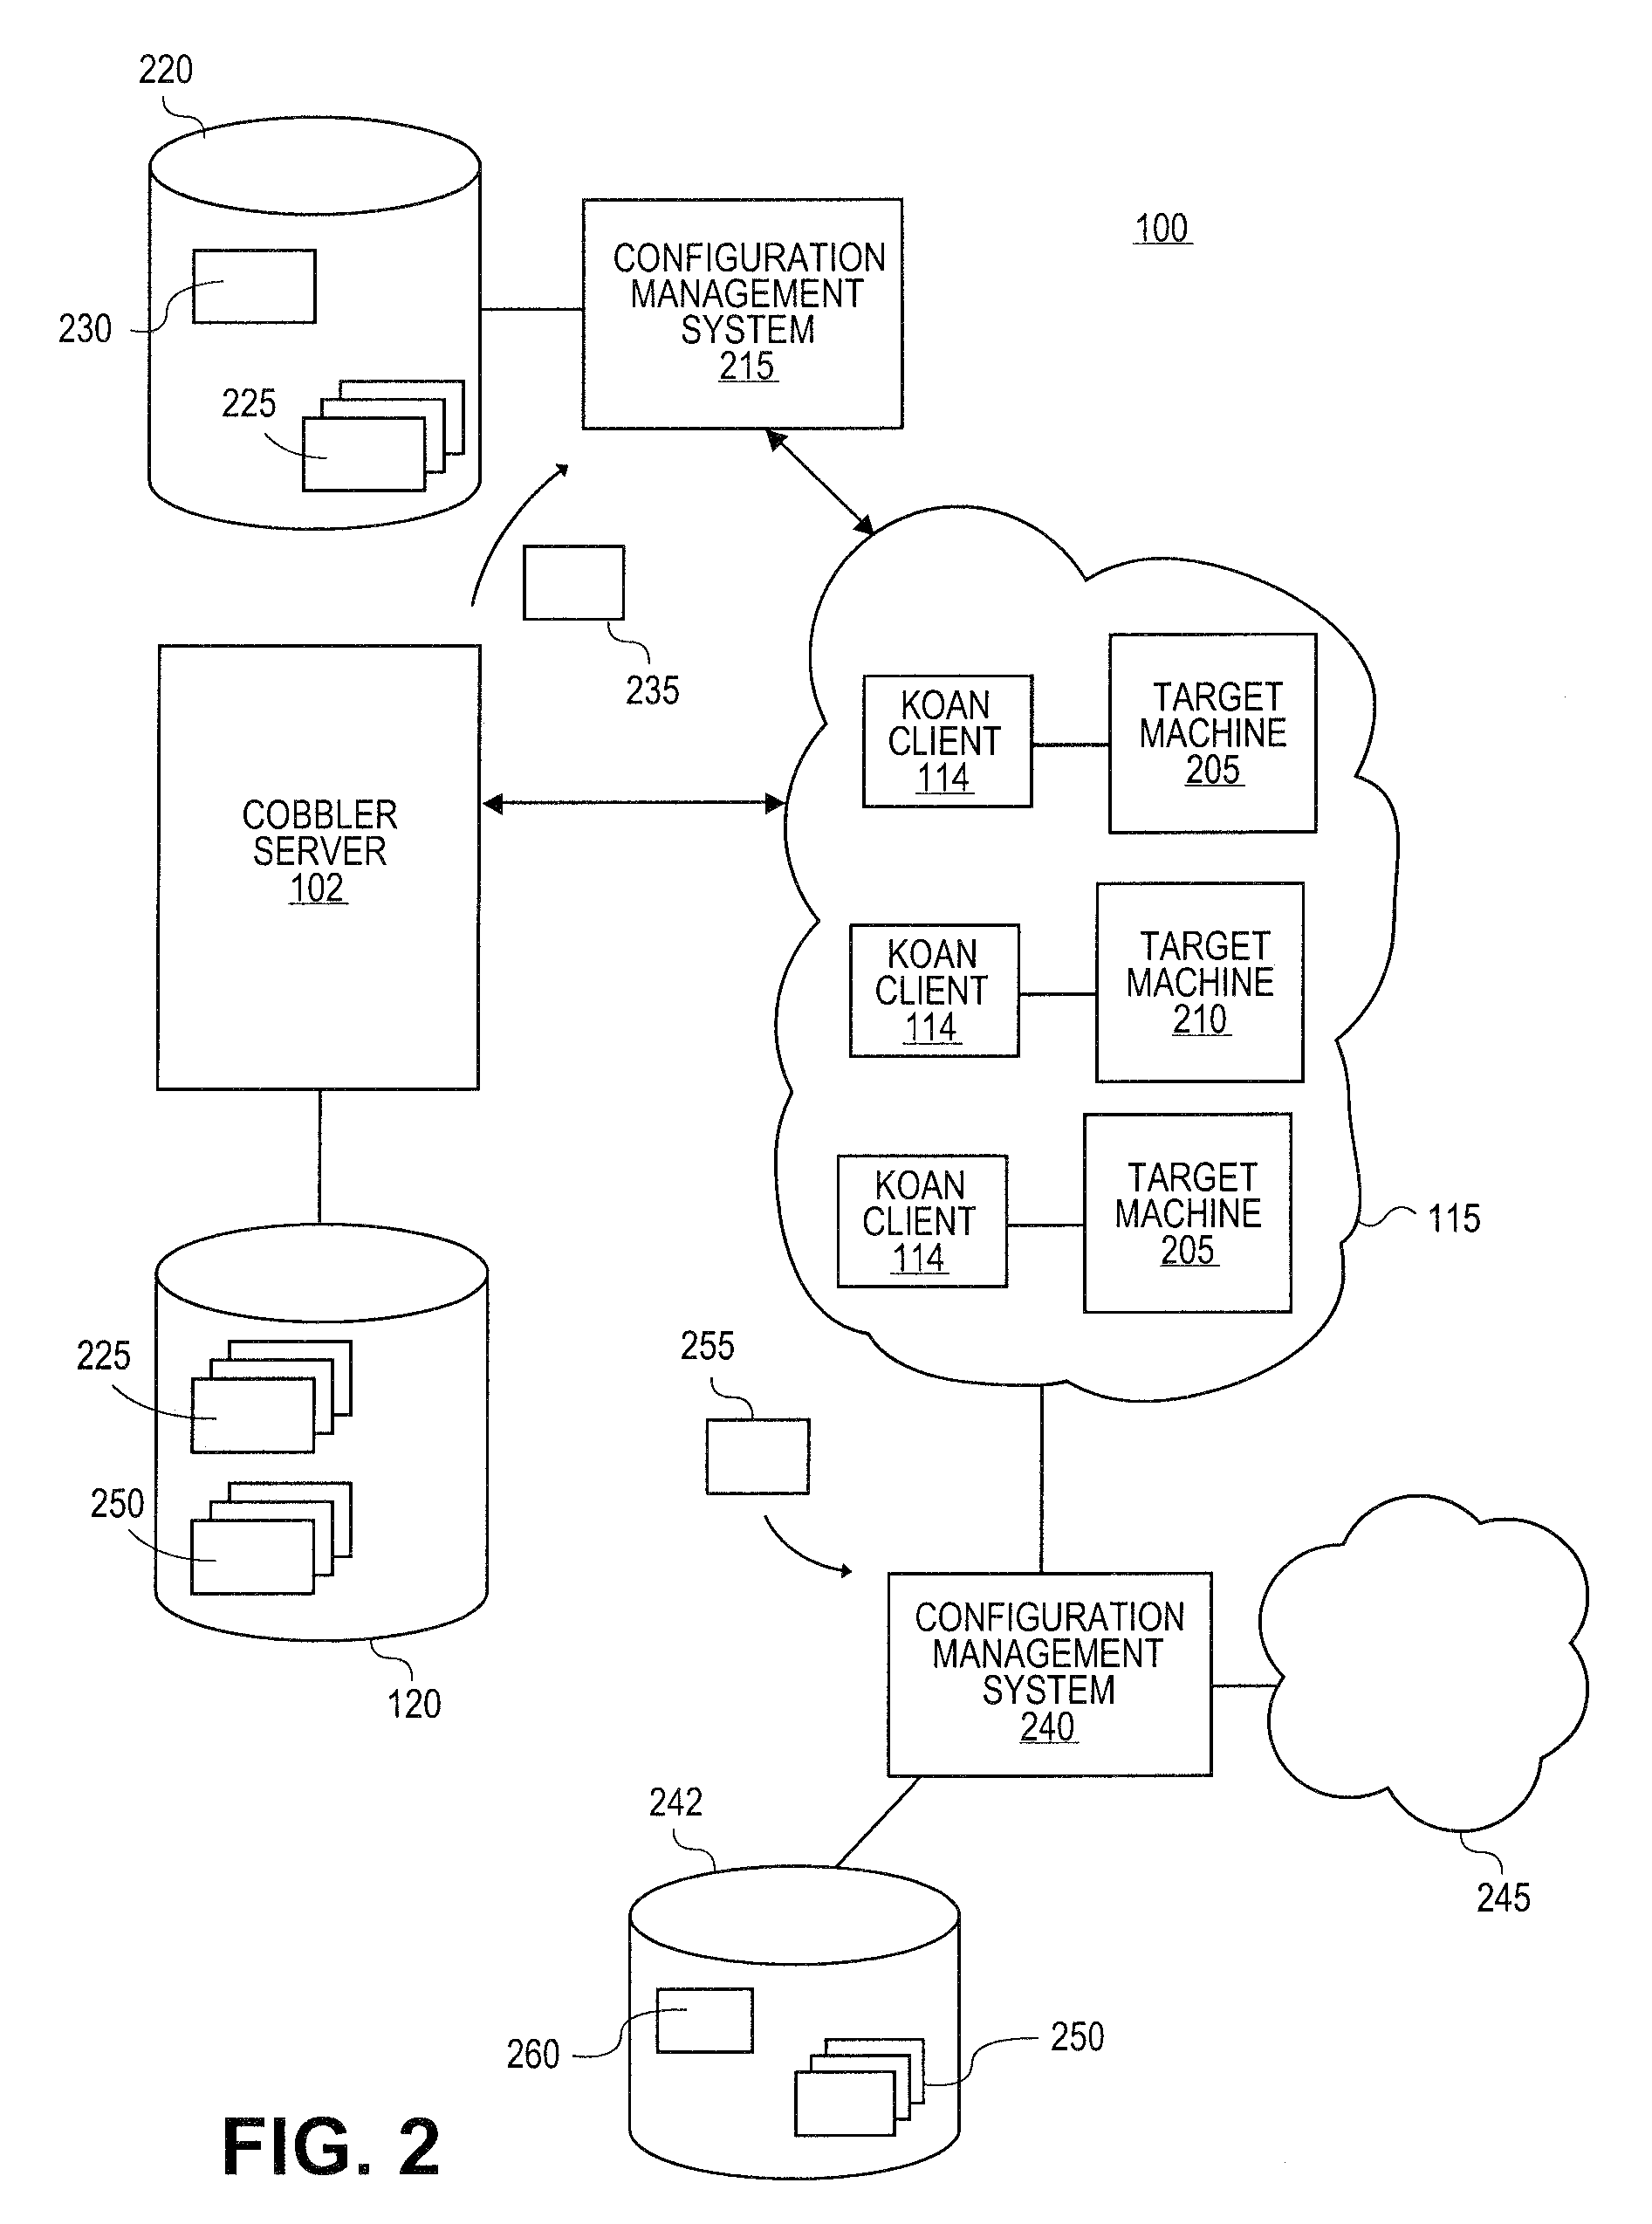 Systems and methods for integrating software provisioning and configuration management